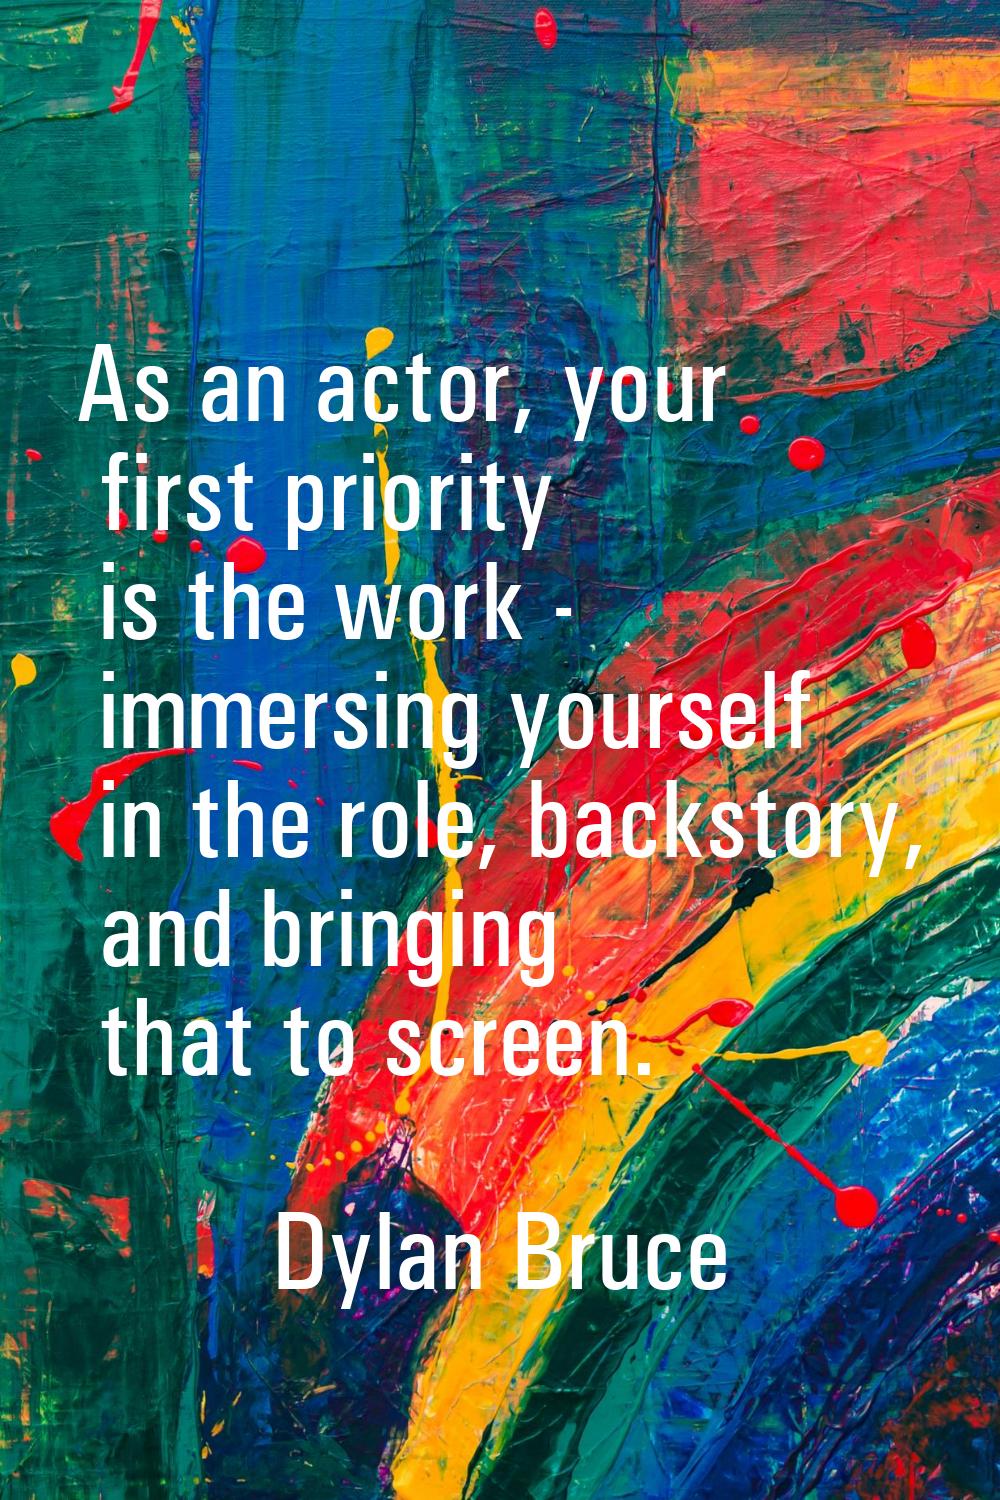 As an actor, your first priority is the work - immersing yourself in the role, backstory, and bring